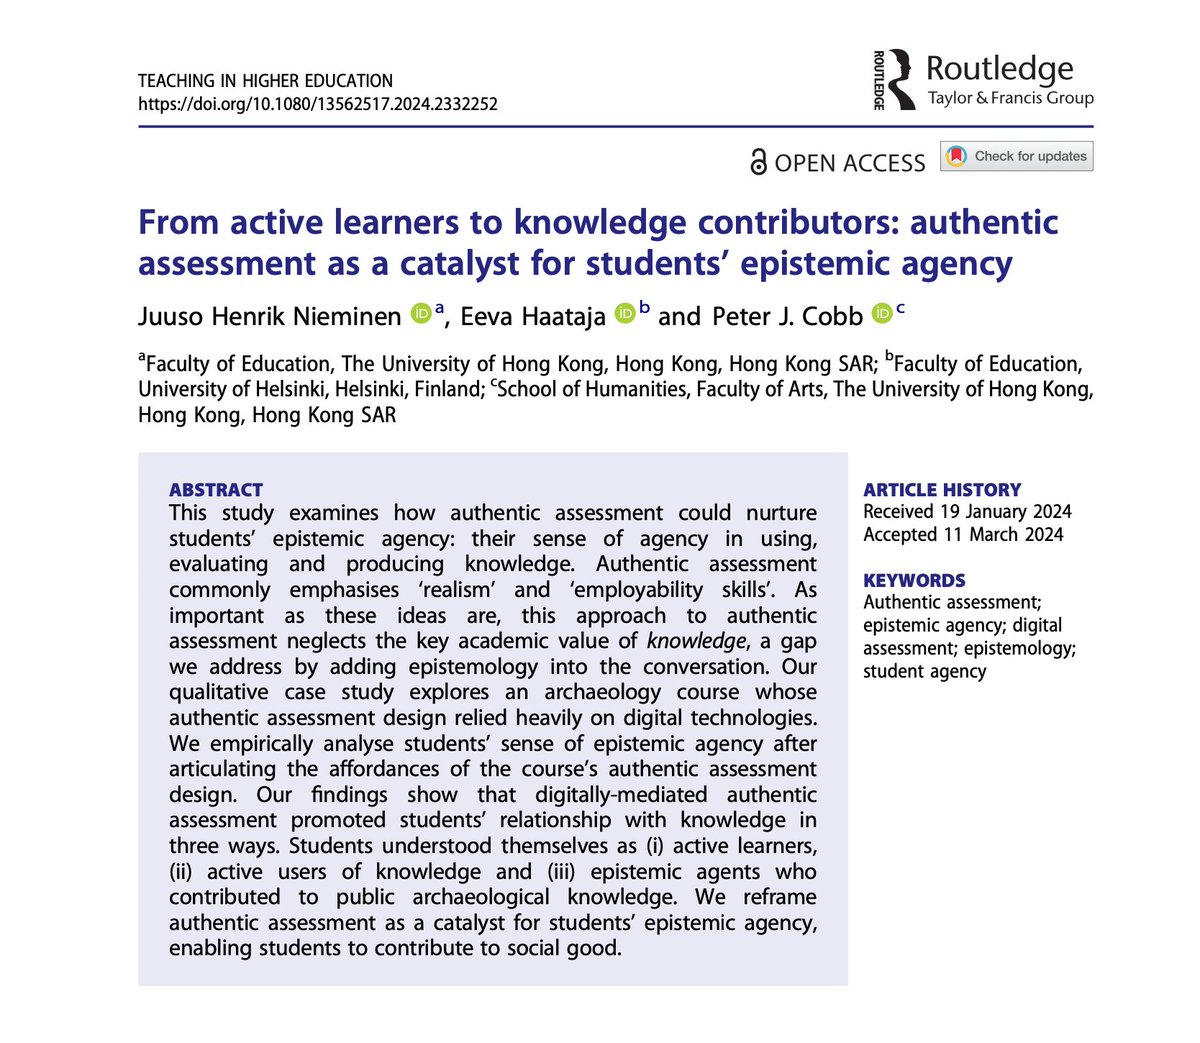 From active learners to knowledge contributors: #AuthenticAssessment as a catalyst for students' epistemic agency Our paper with @EevaHaataja and Peter J. Cobb has been published in @TeachinginHE! We explore assessment from the viewpoint of knowledge 💡 tandfonline.com/doi/full/10.10…